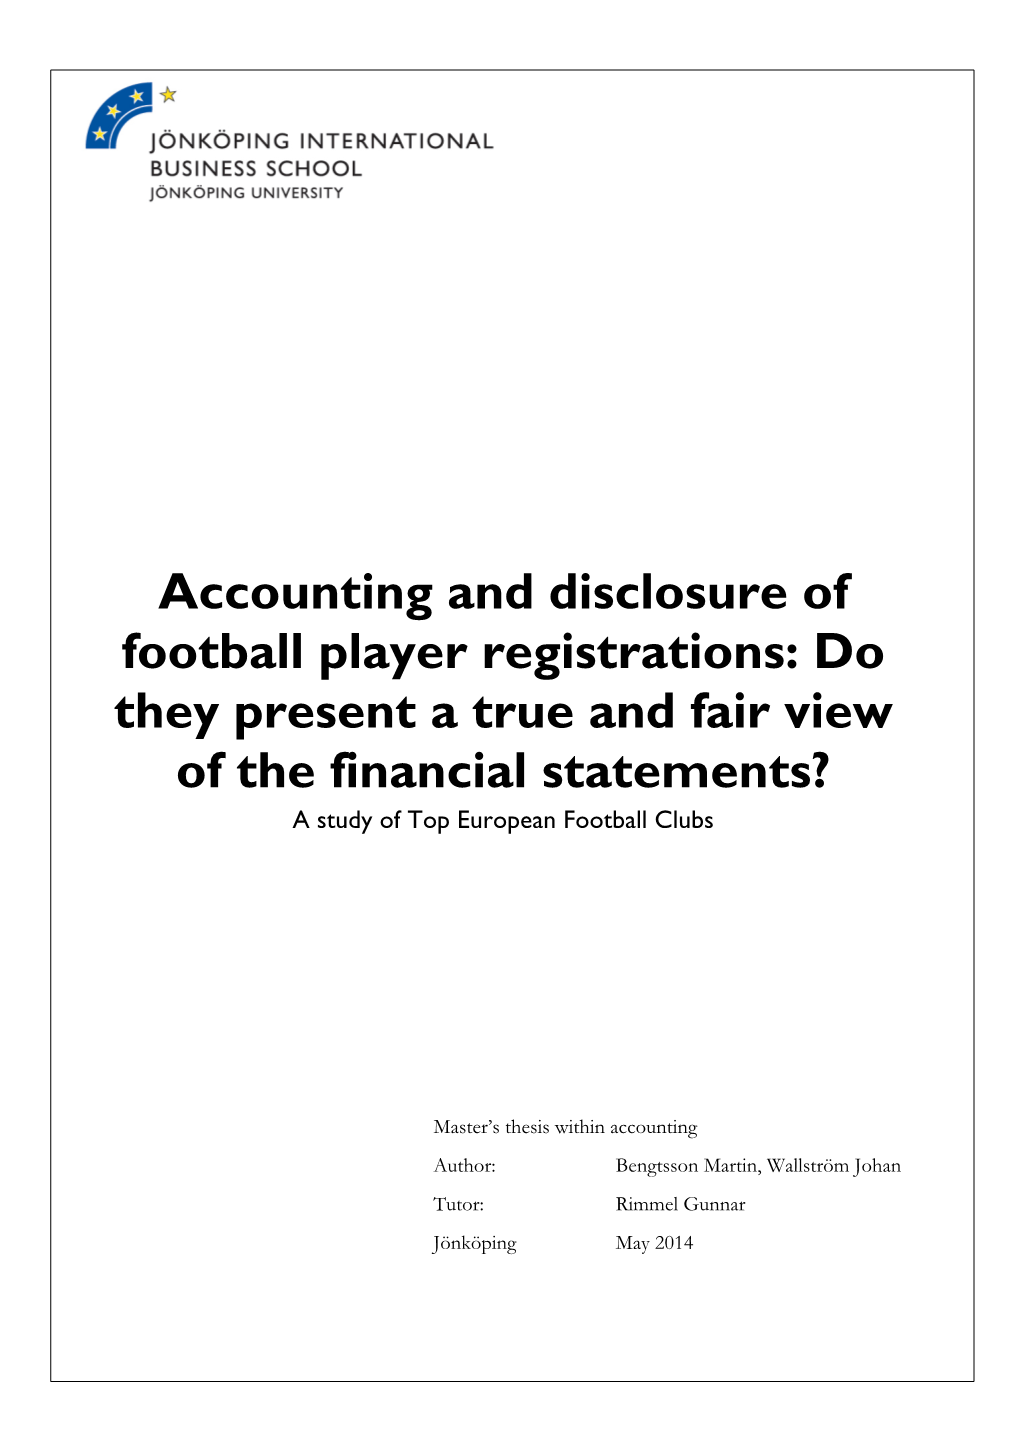 Accounting and Disclosure of Football Player Registrations: Do They Present a True and Fair View of the Financial Statements? a Study of Top European Football Clubs